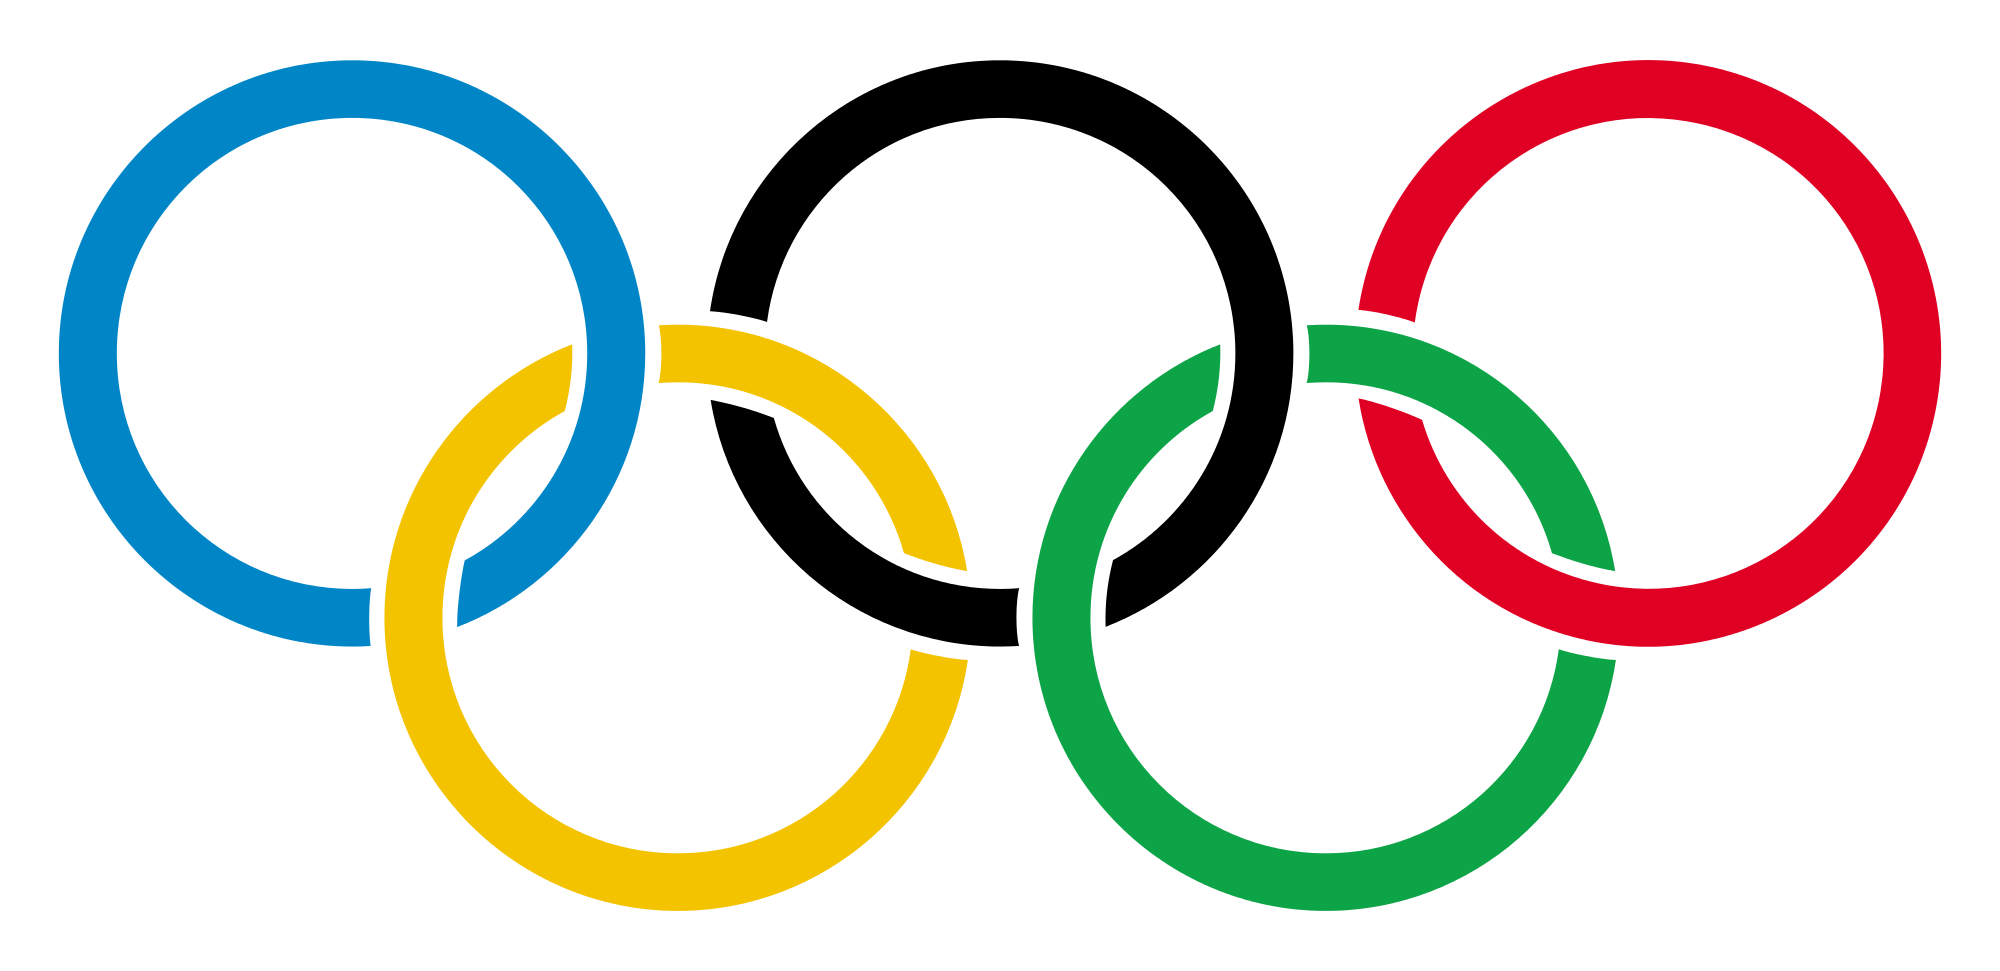 Olympic Rings Transparent Background 3   Olympic Rings Png Hd - Olympics, Transparent background PNG HD thumbnail